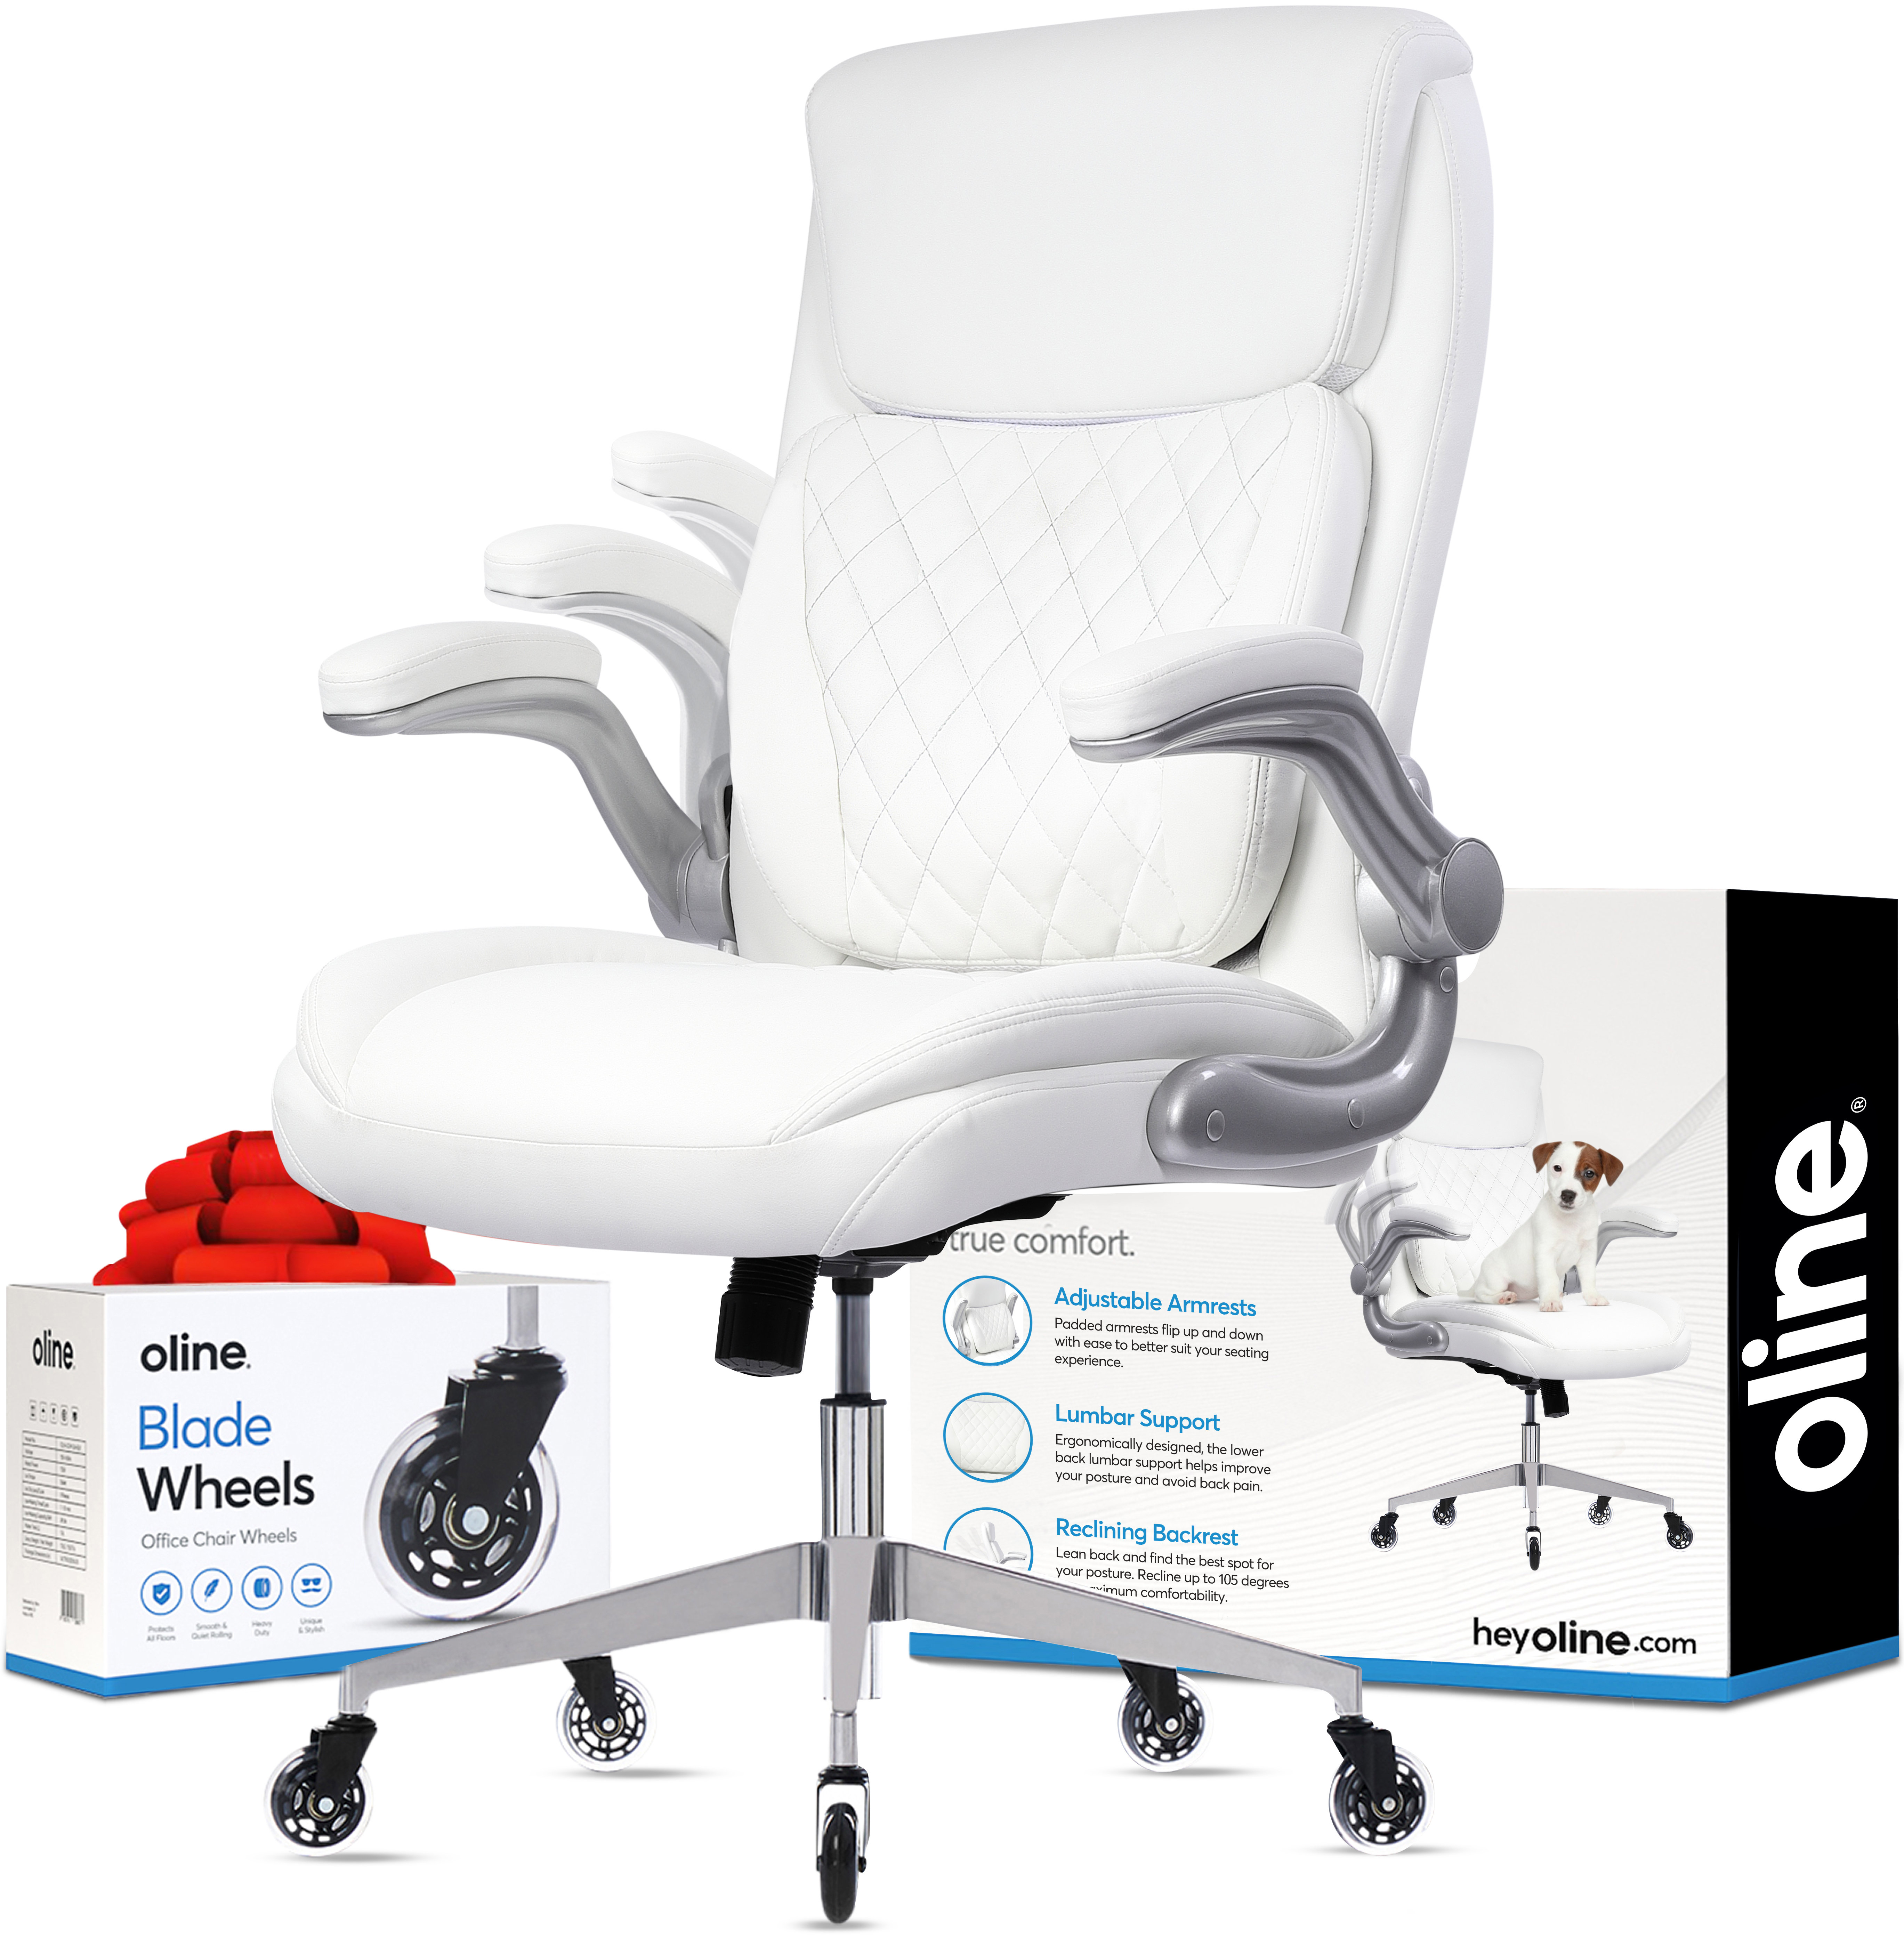 Back Support Office Chair - Flower Love  Ergonomic chair, Best office chair,  Kneeling chair